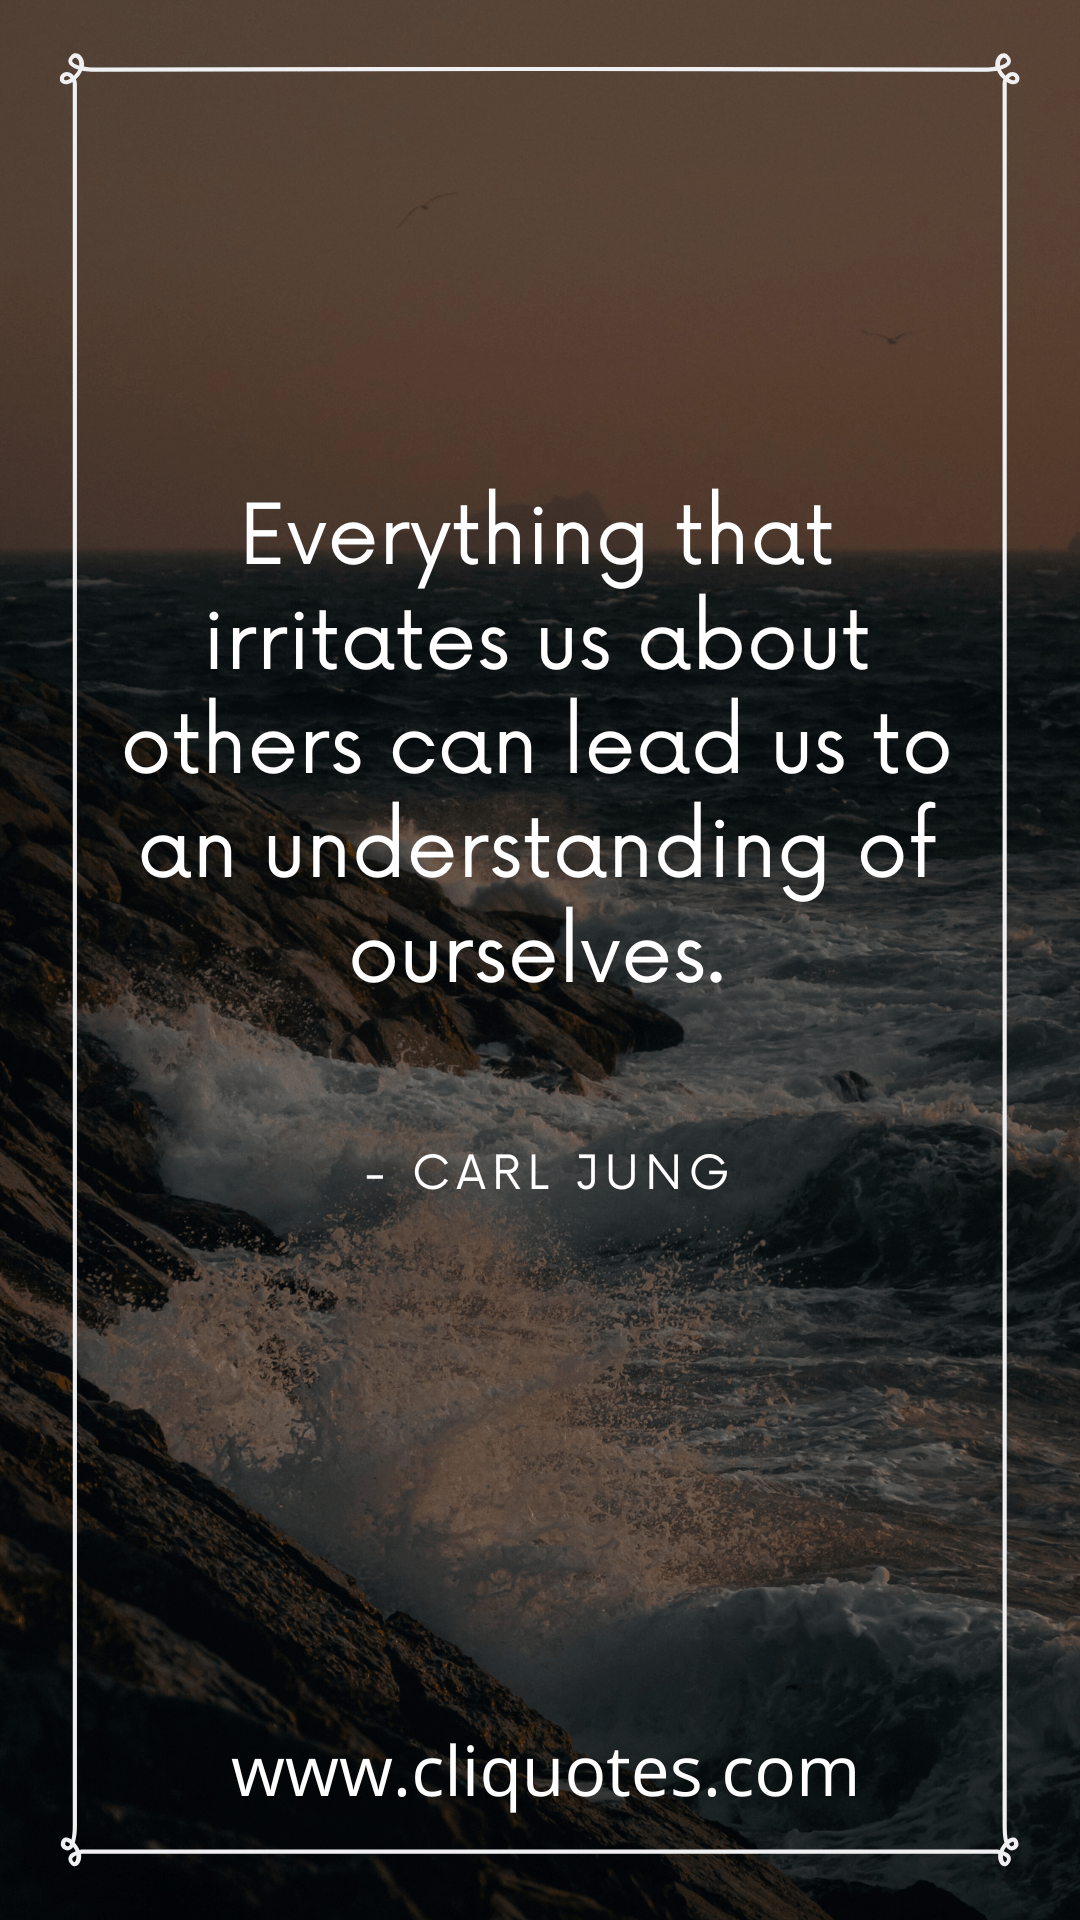 Everything that irritates us about others can lead us to an understanding of ourselves. - Carl Jung